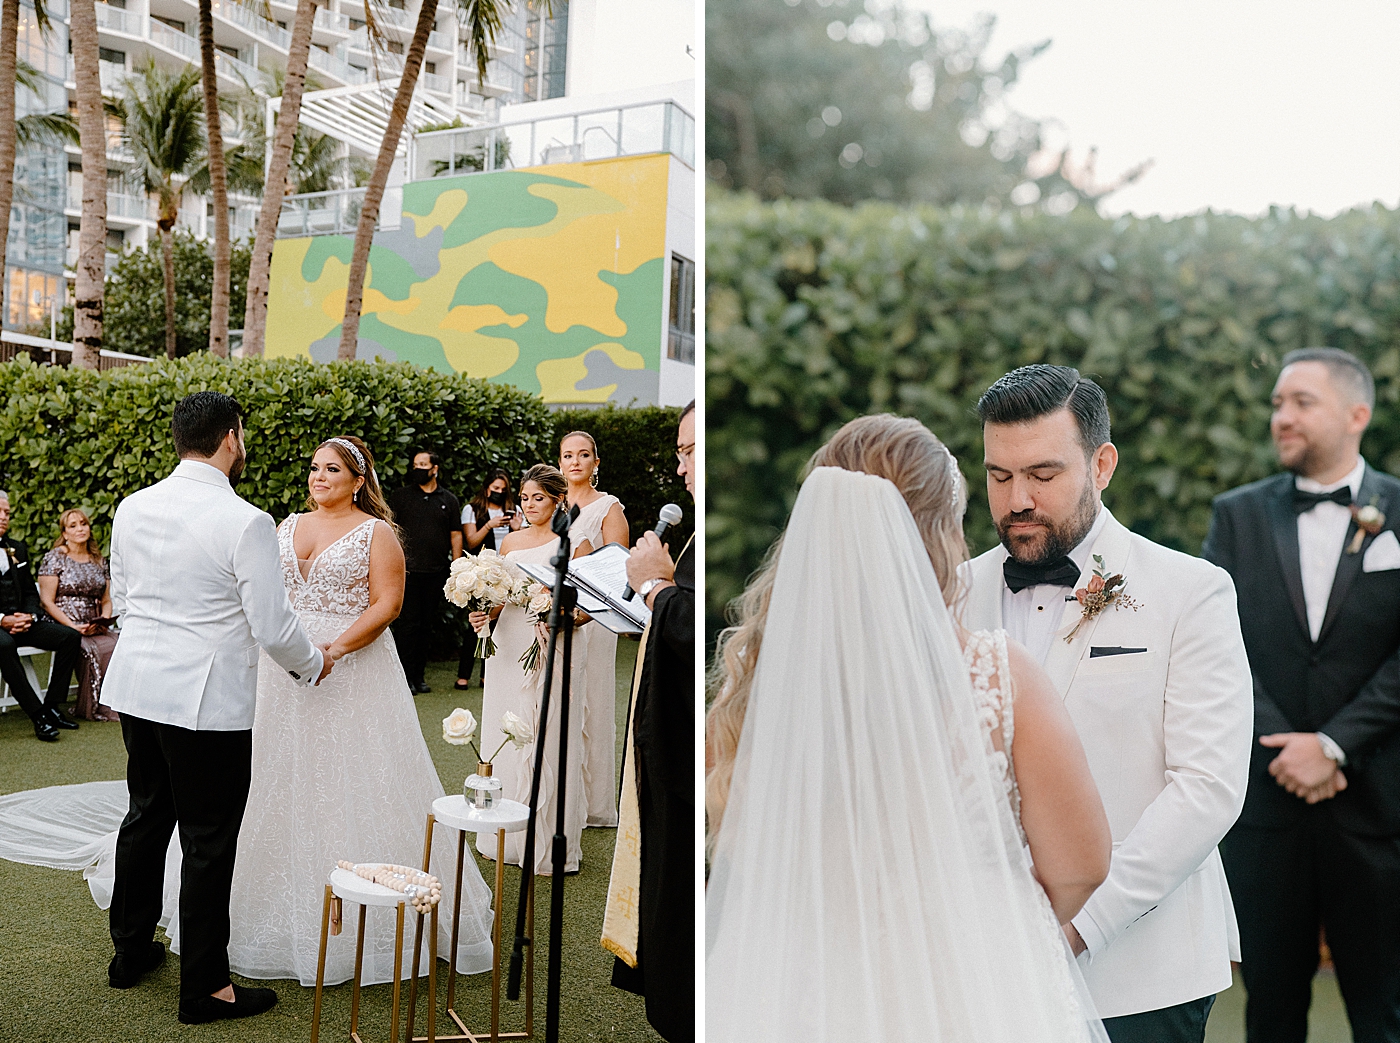 Ceremony vows with Bride and Groom holding hands Modern Elegant Wedding at The W South Beach captured by South Florida Wedding Photographer Erika Tuesta Photography